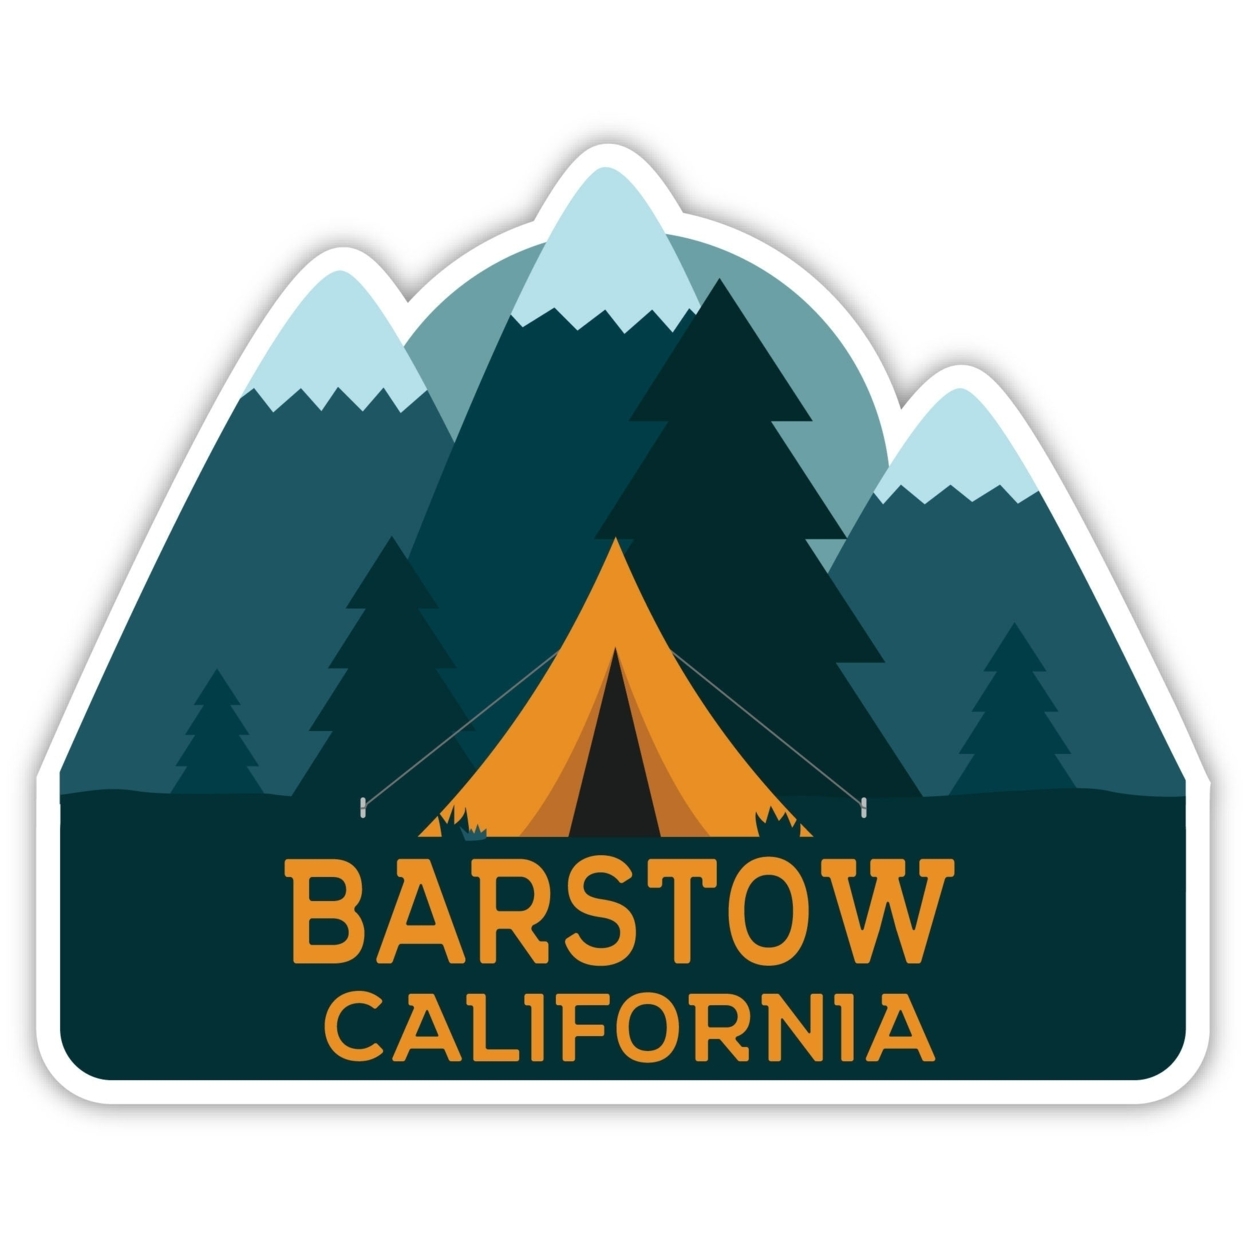 Barstow California Souvenir Decorative Stickers (Choose Theme And Size) - 4-Pack, 6-Inch, Camp Life